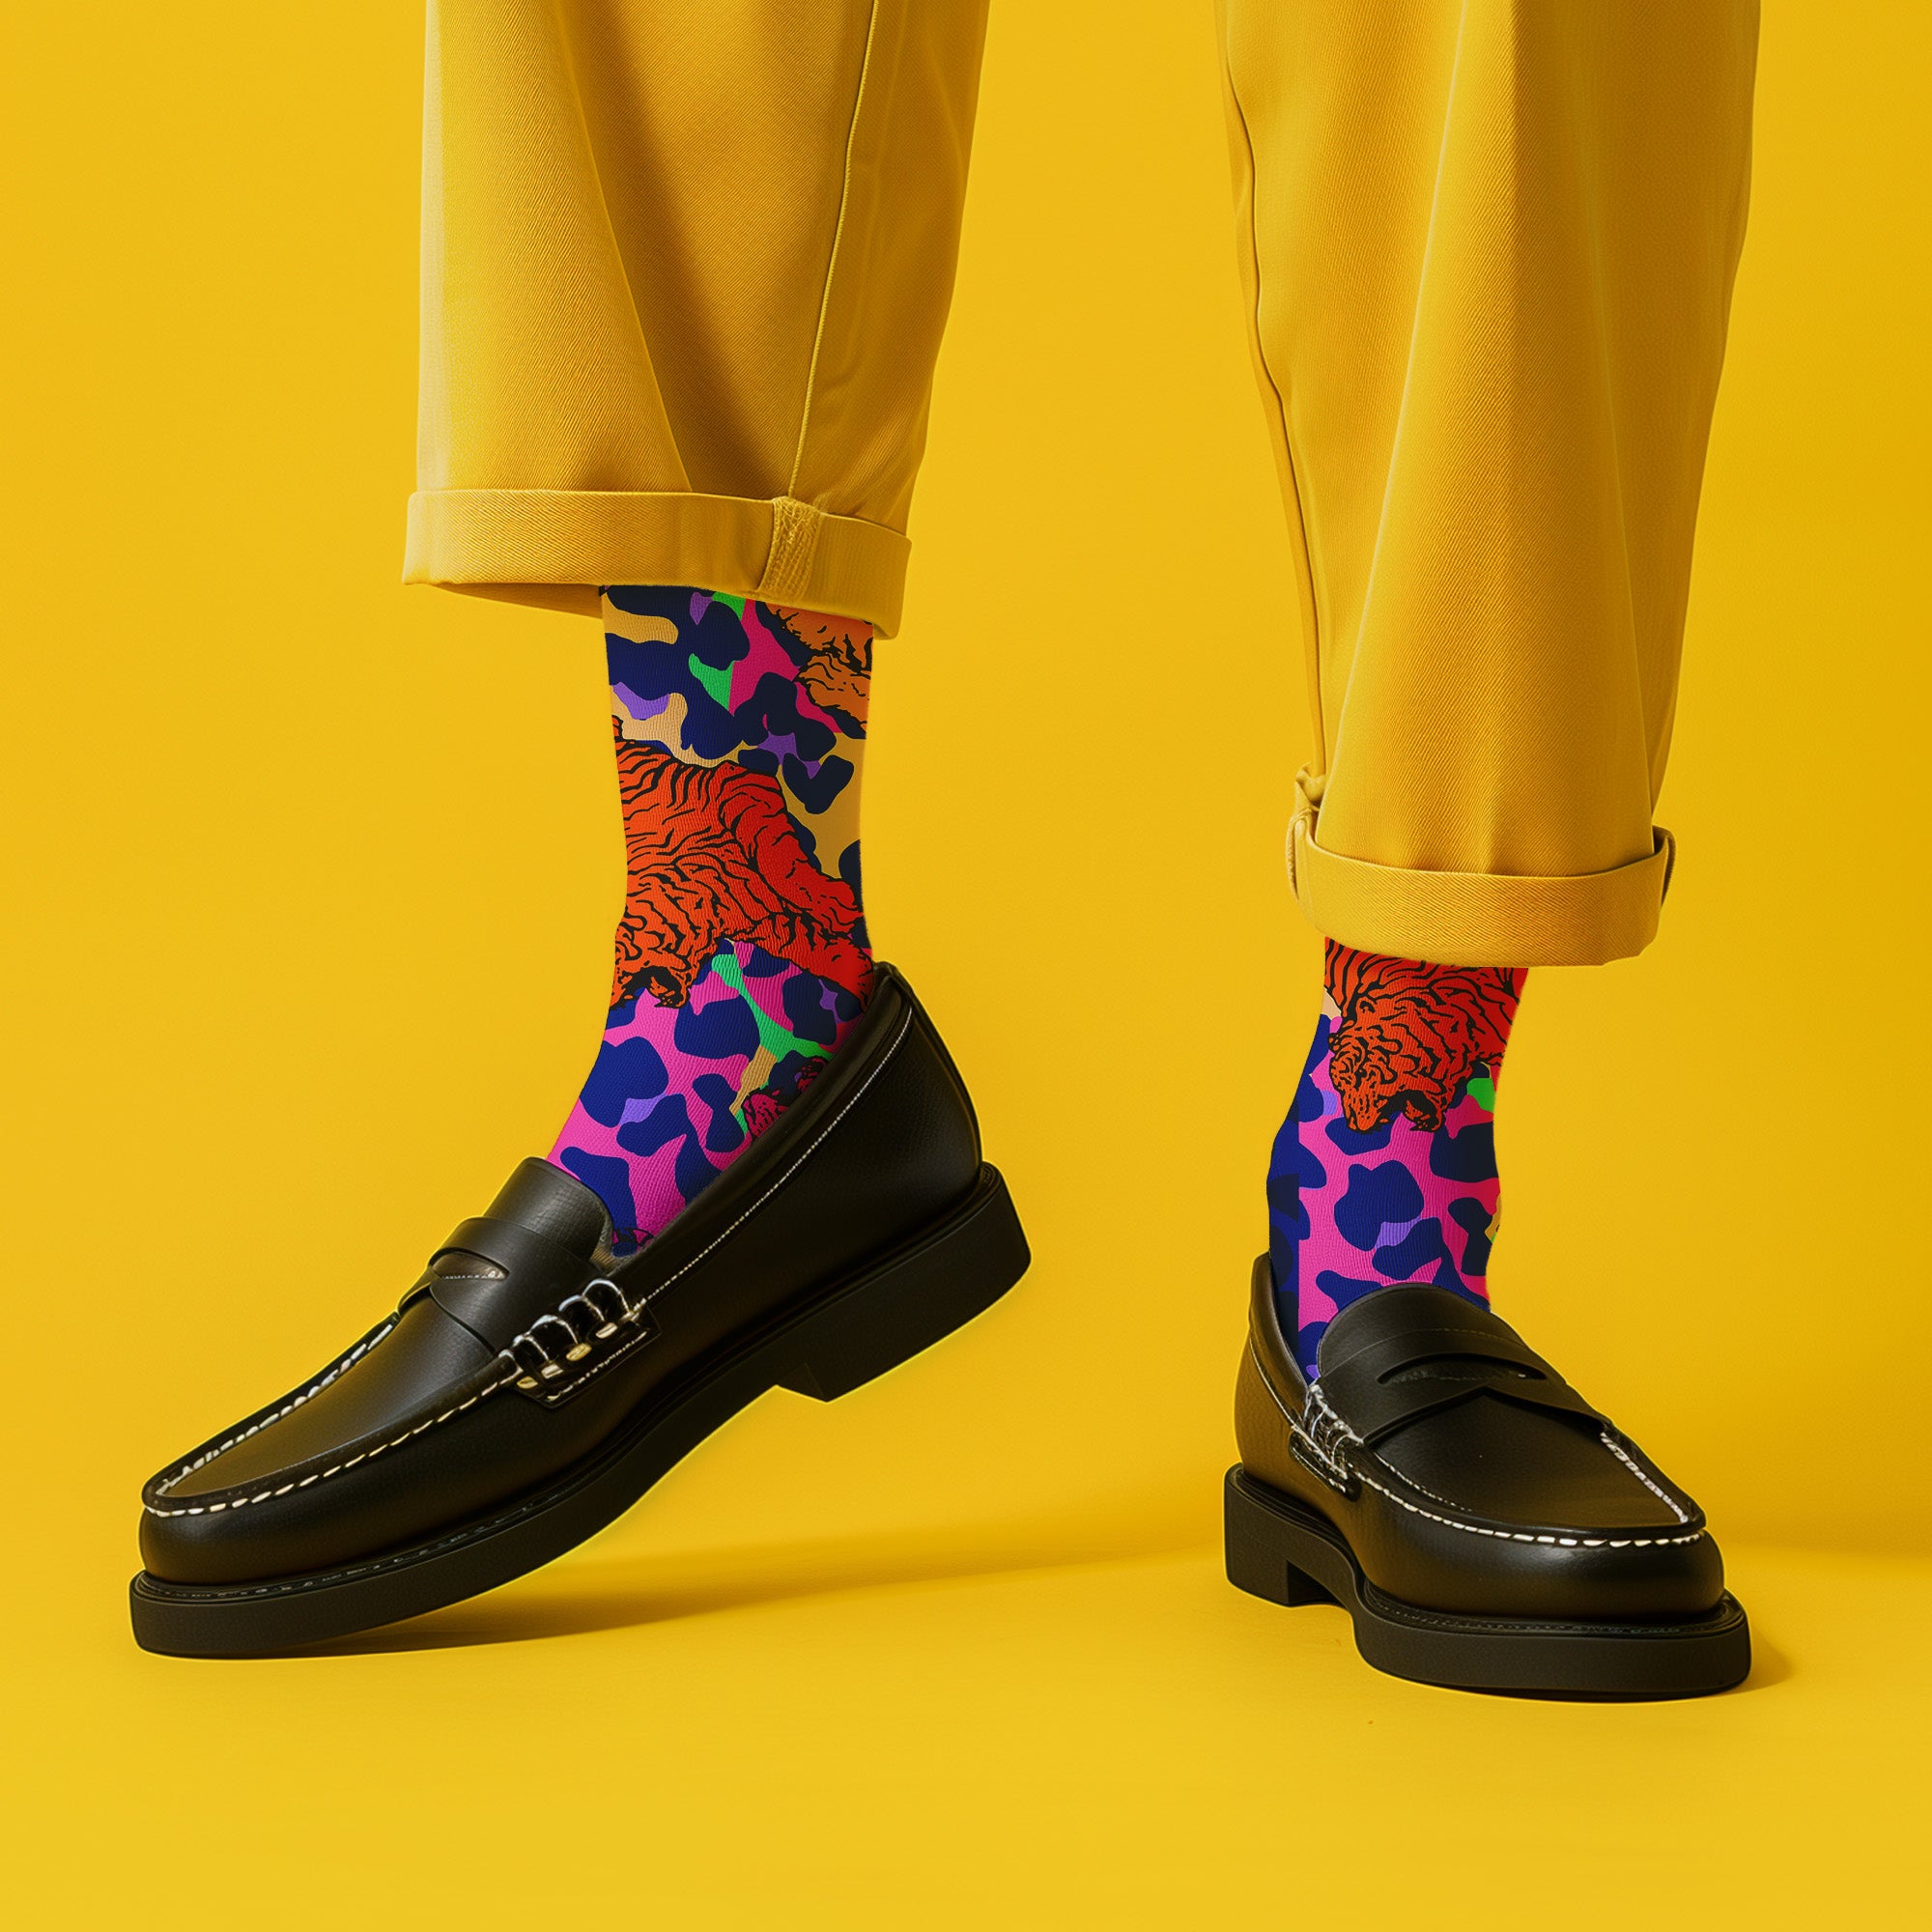 Stylish jungle-themed socks with tigers and abstract camo patterns in a palette of purple, blue, and pink, laid out on a yellow background, ideal for adding a pop of color to your wardrobe